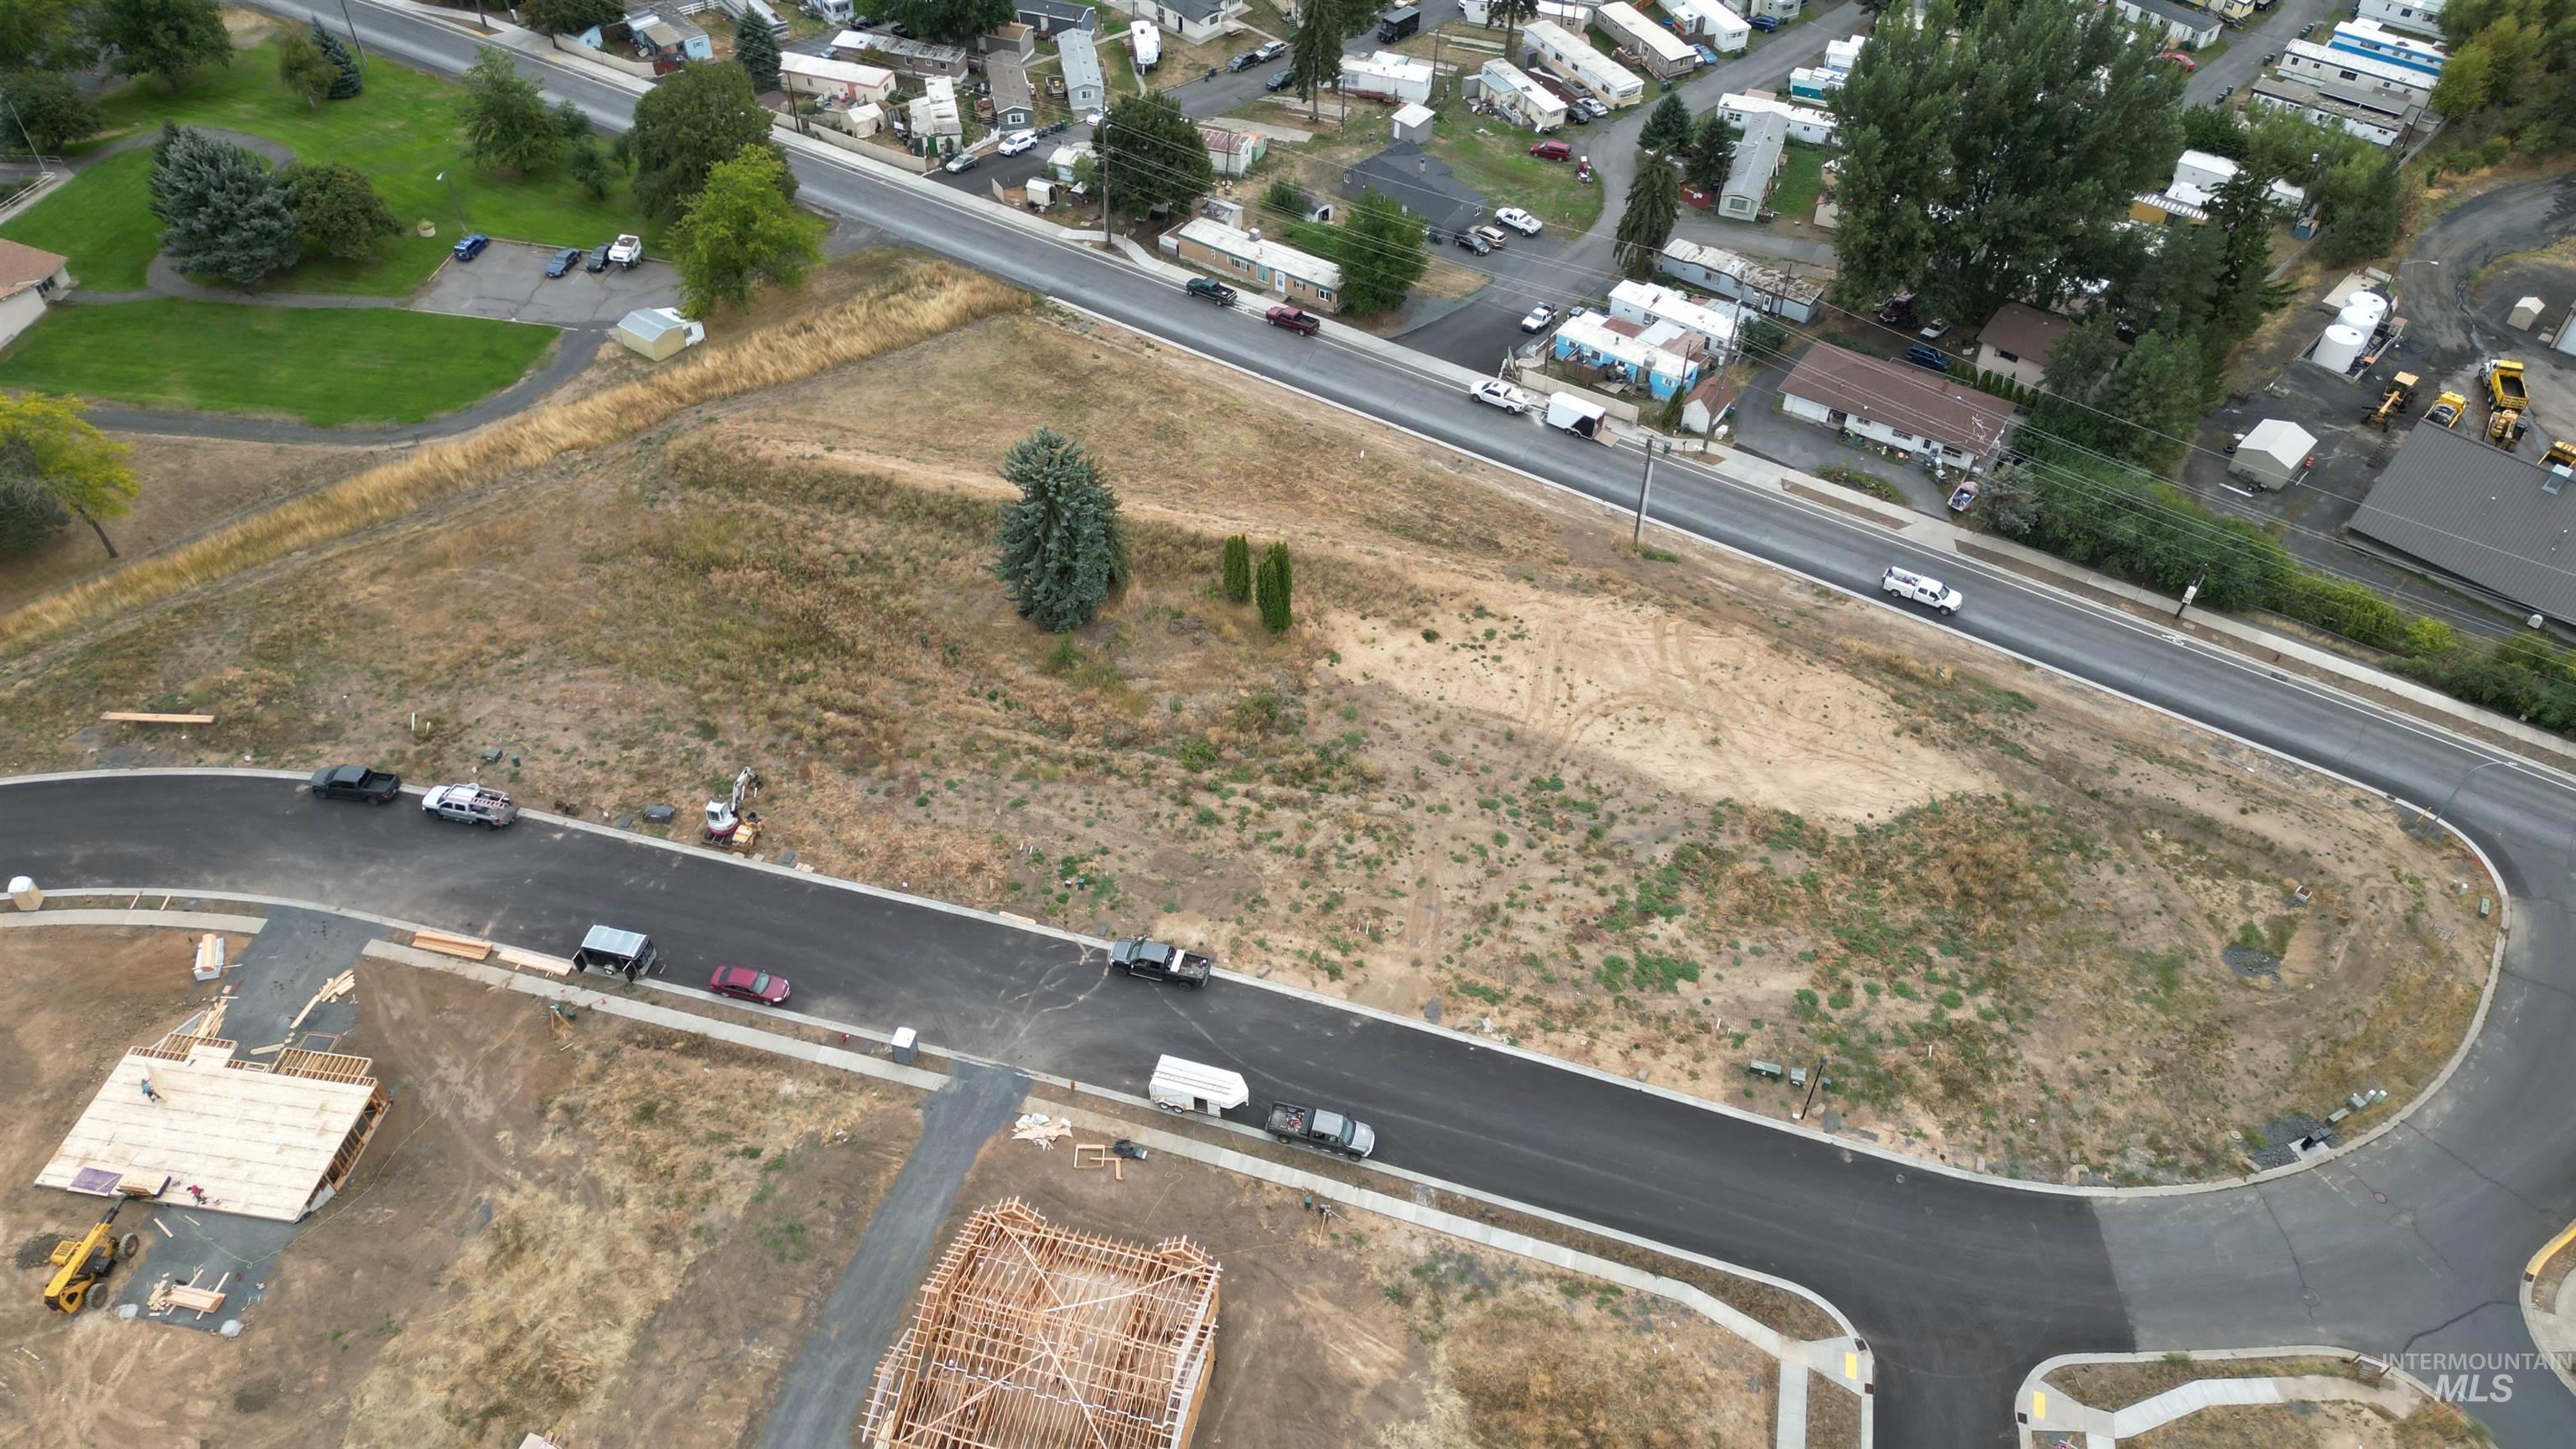 1989 Sunnyside Ave., Moscow, Idaho 83843, Land For Sale, Price $145,000,MLS 98888868